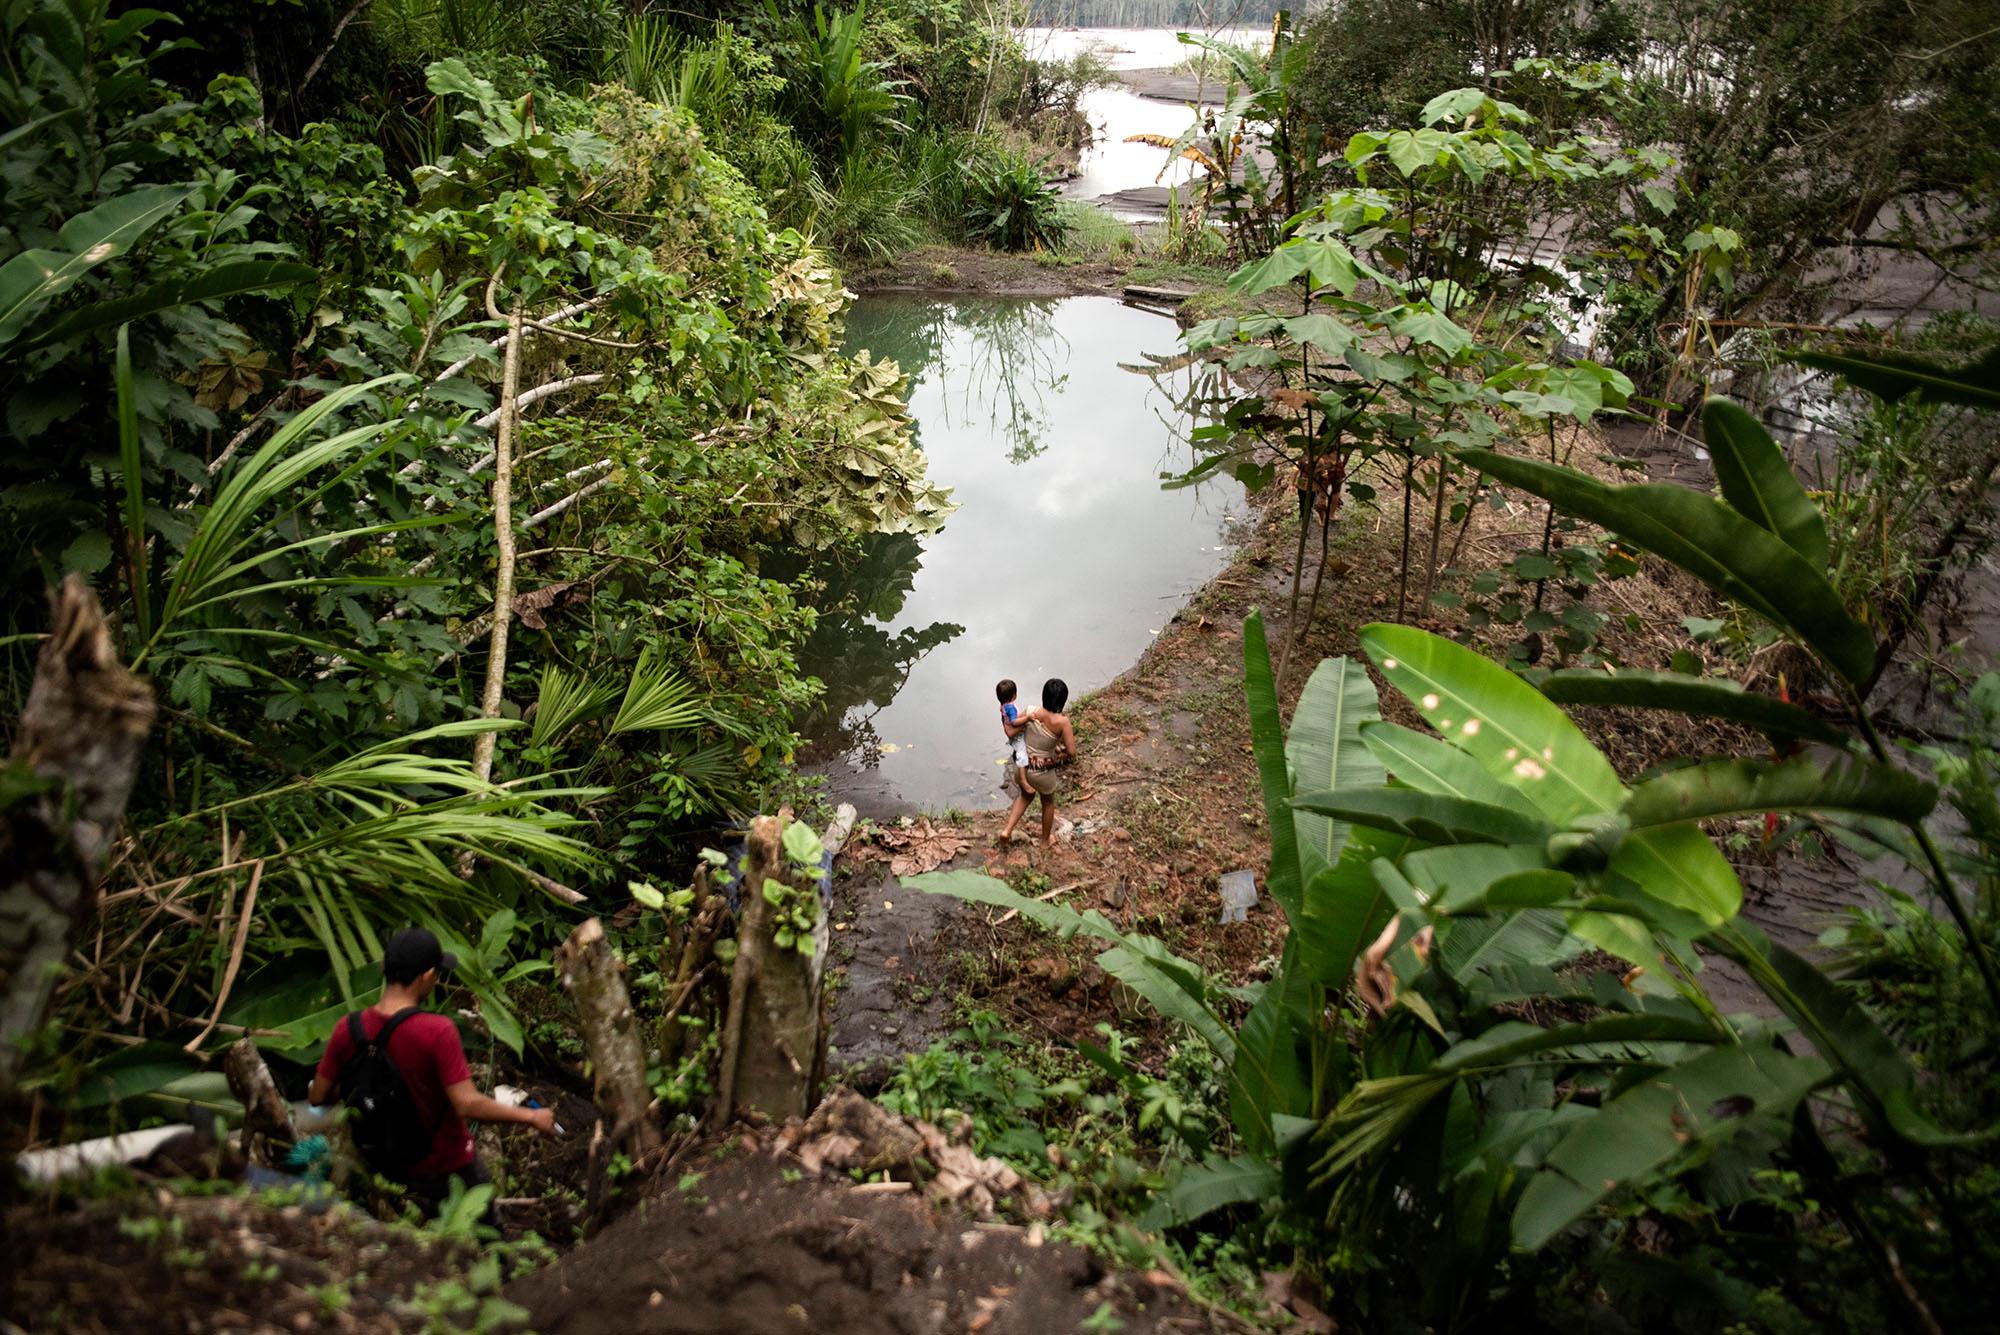 Grefa family goes to the Napo River. During the curfew, each family received 24lts of water, but...